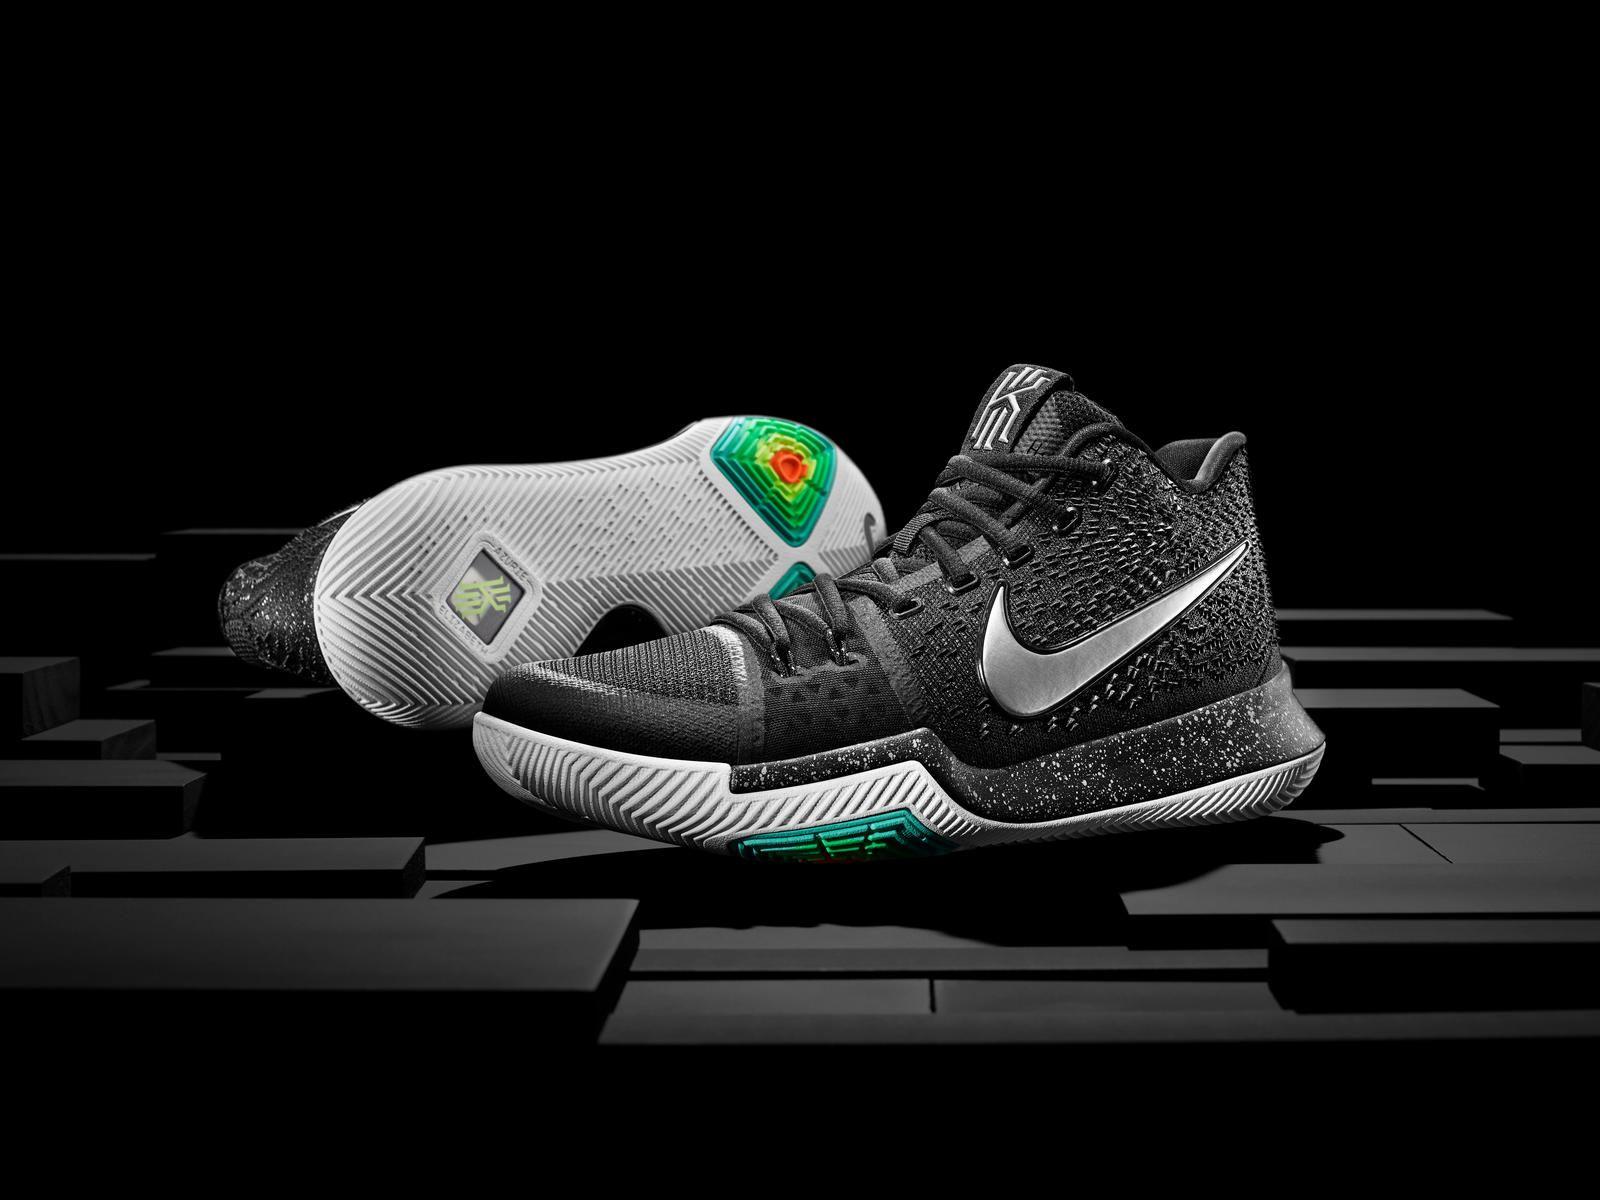 KYRIE 3 Built for Kyrie Irving's Prolific Game